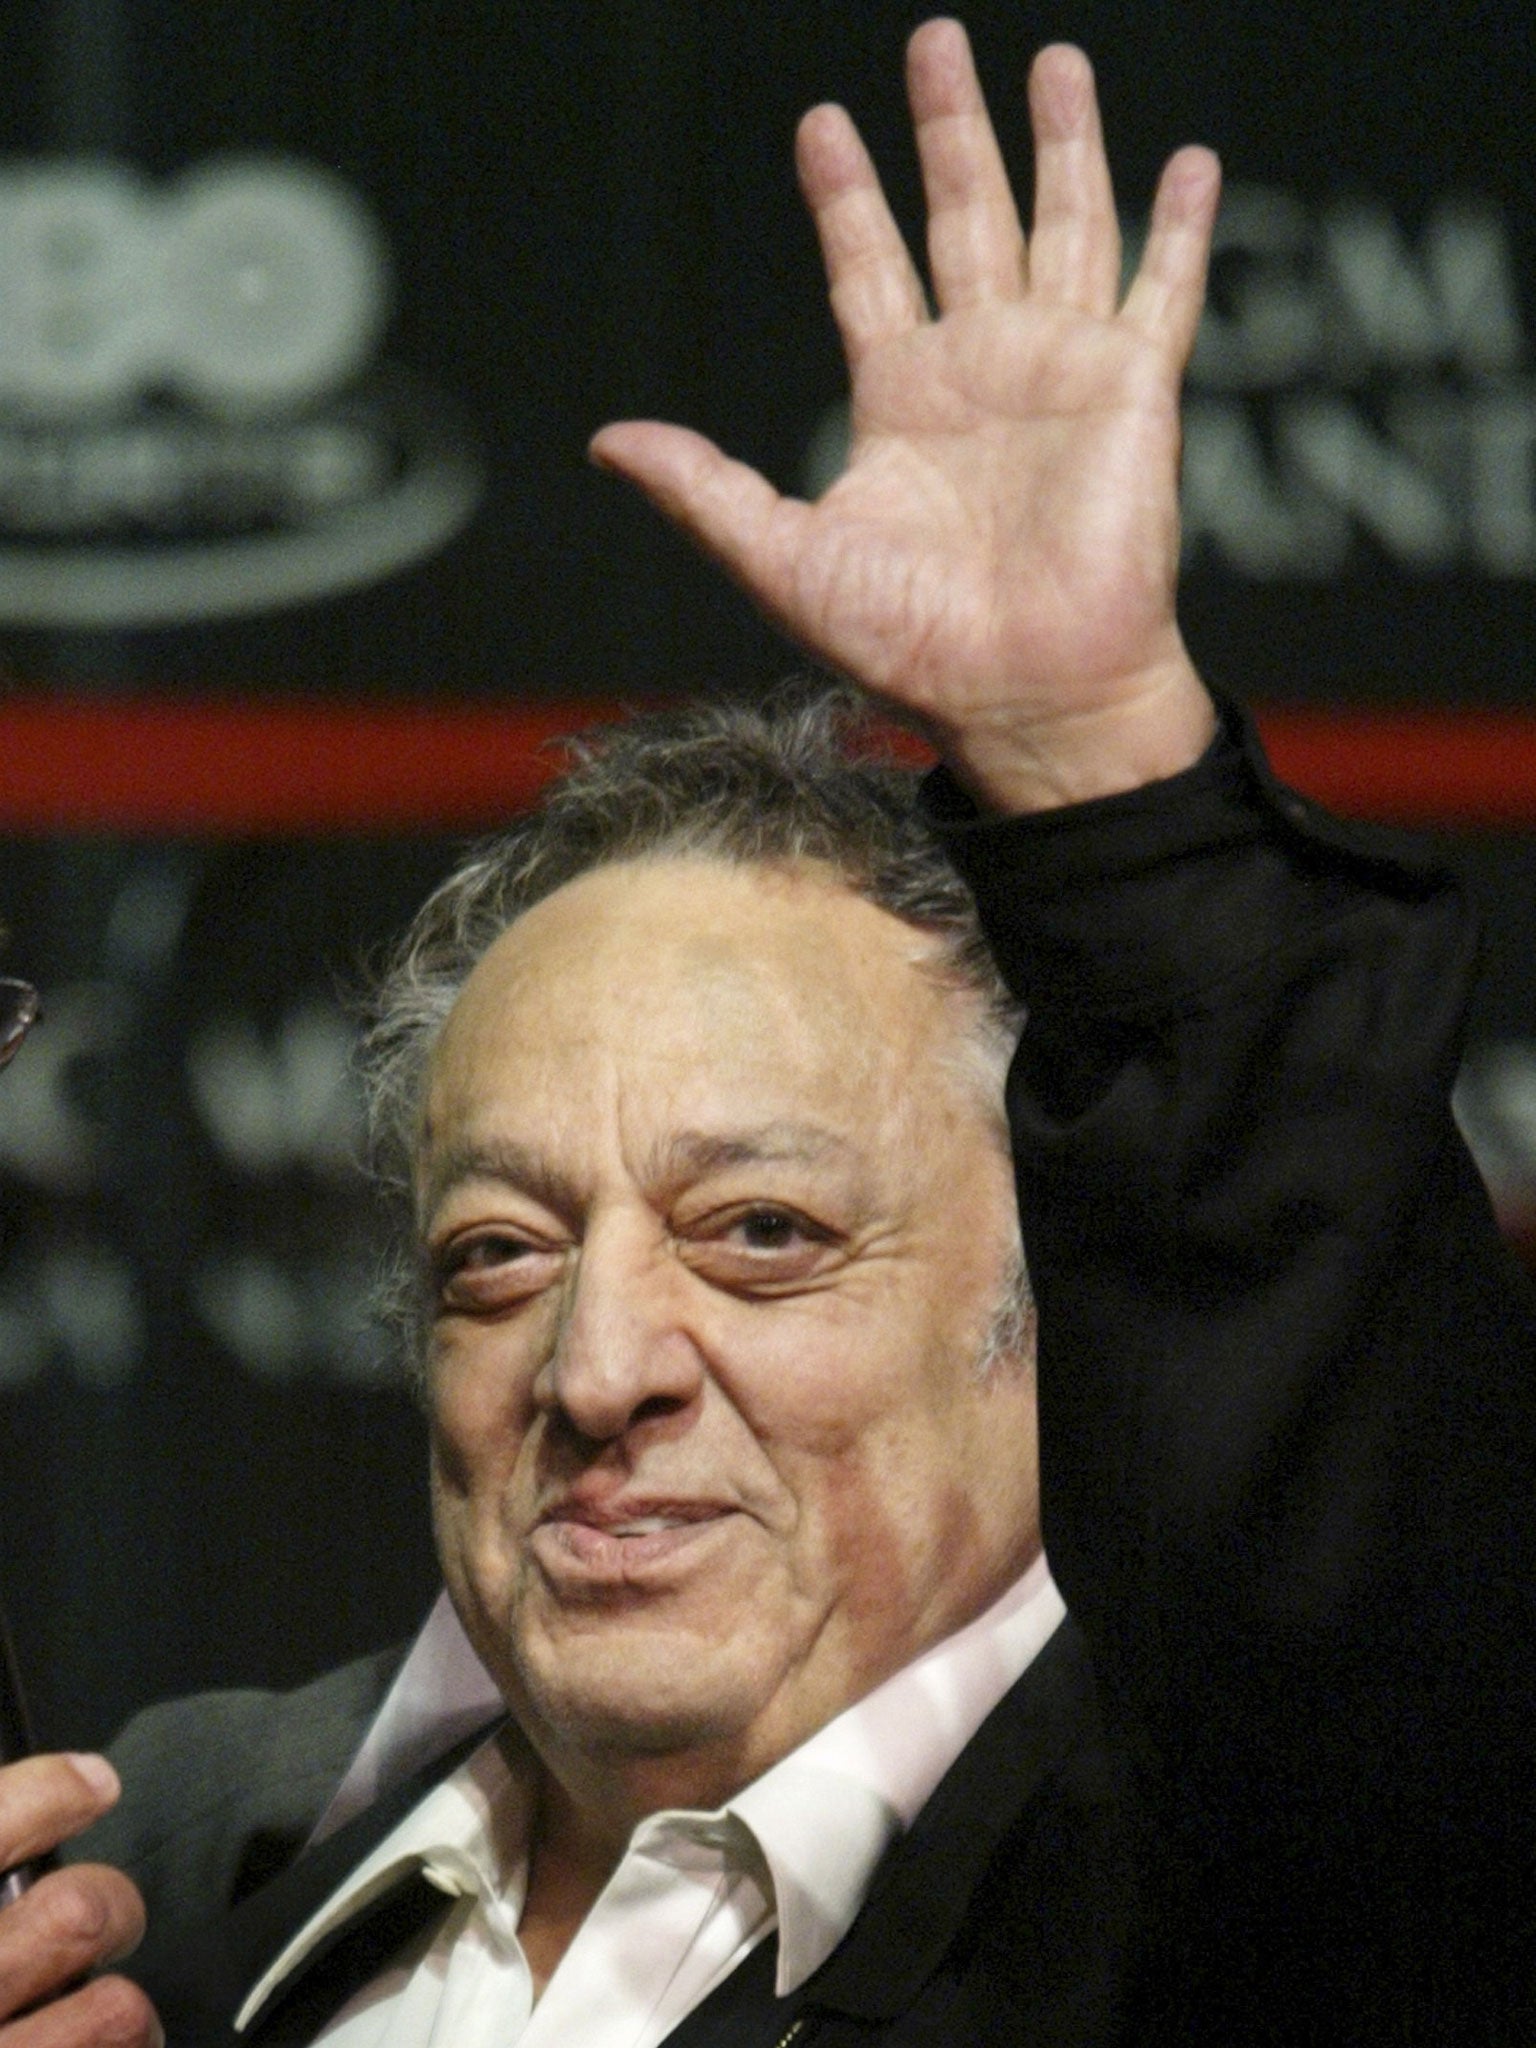 Jose Sulaiman Administrator respected, feared and hated in equal measure whose reforms made boxing a safer sport The Independent The Independent image